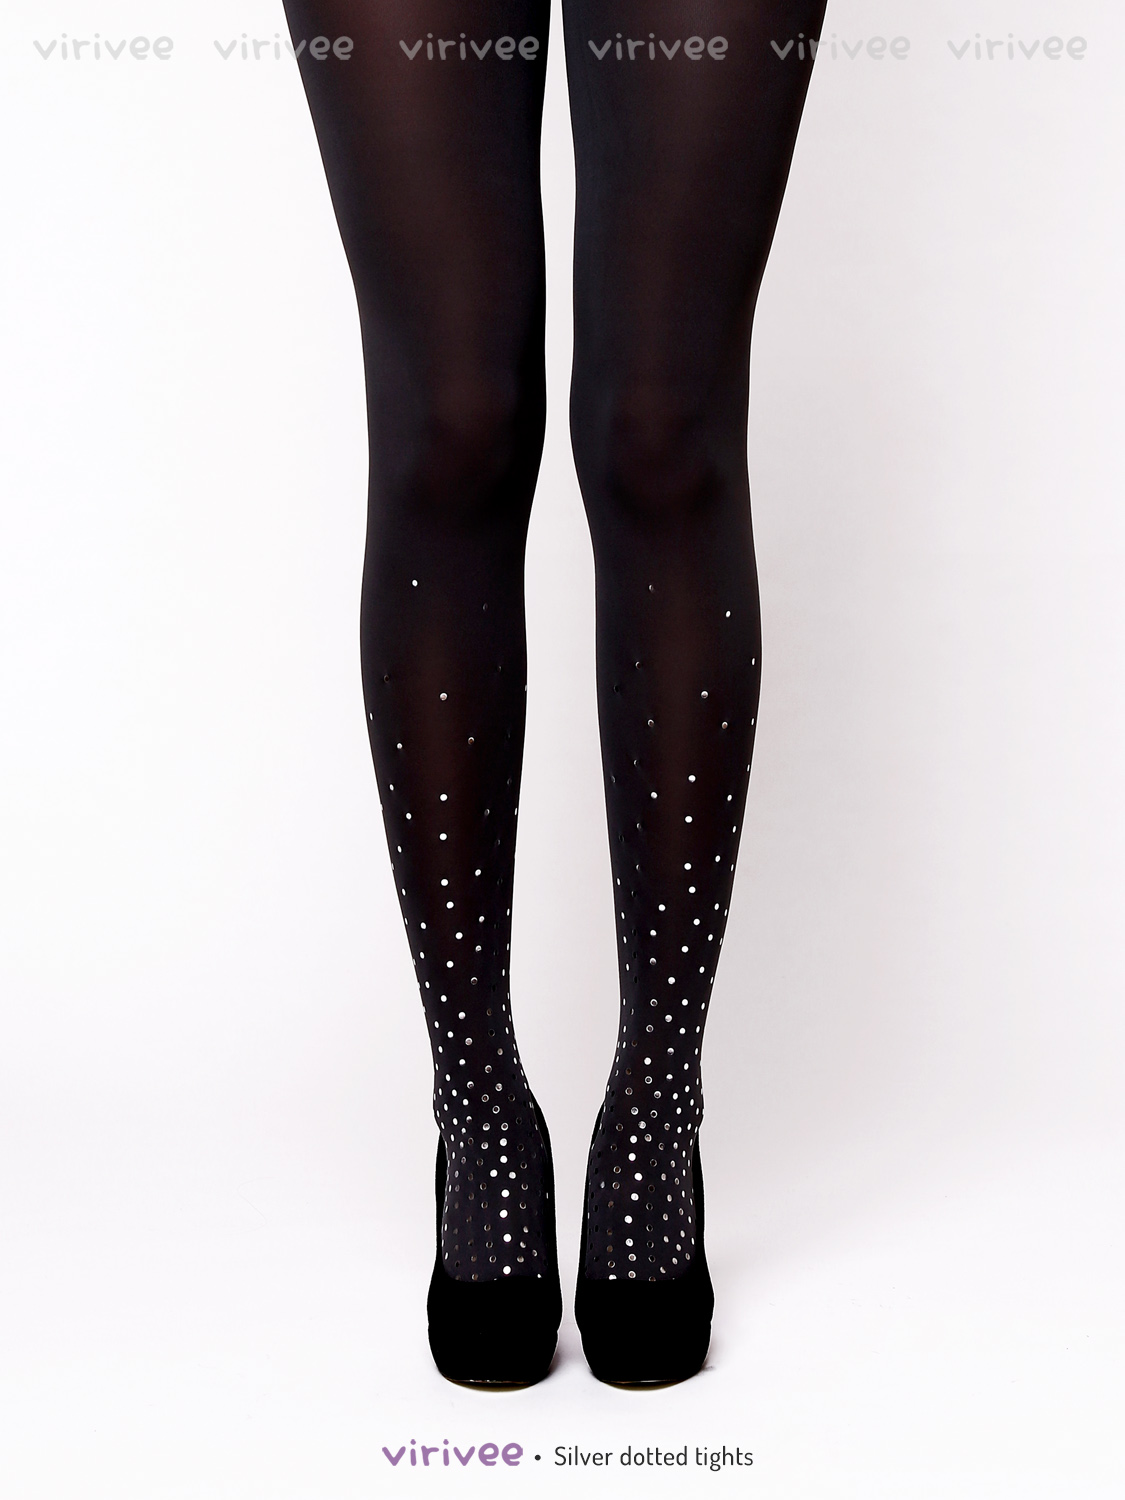 Gold or silver dotted tights